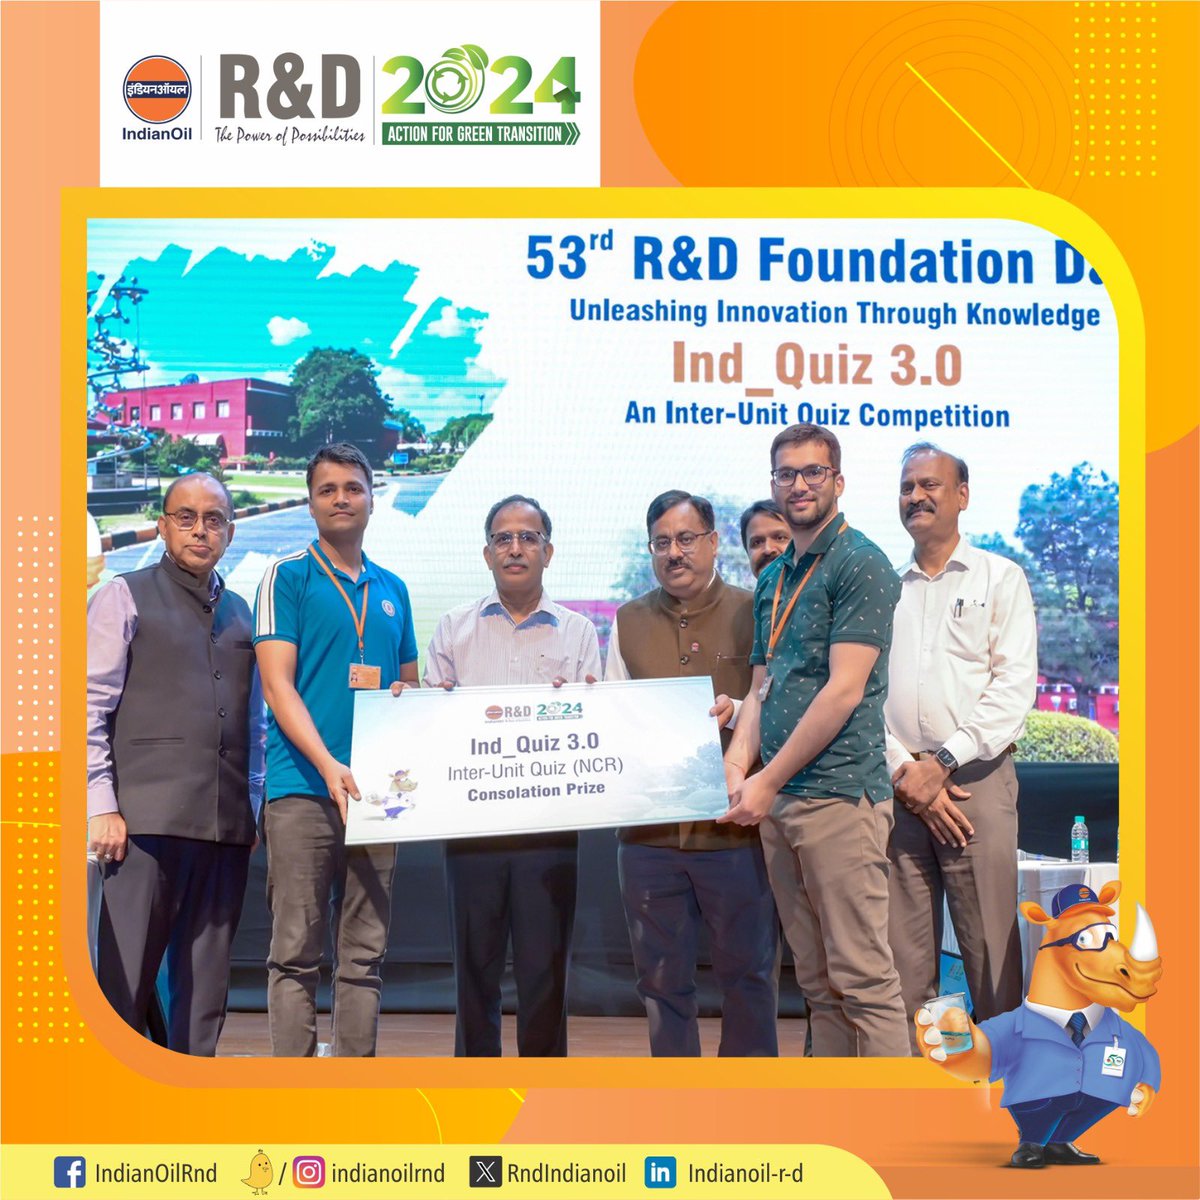 IndianOil R&D organized a first of its kind Interunit Quiz - Ind_Quiz 3.0. The Quiz saw enthusiastic participation from Fifty teams across IndianOil units/offices in NCR. Director(R&D) felicitated the winners of the Quiz. #IndianOil #RnD #KnowledgeIsStrength